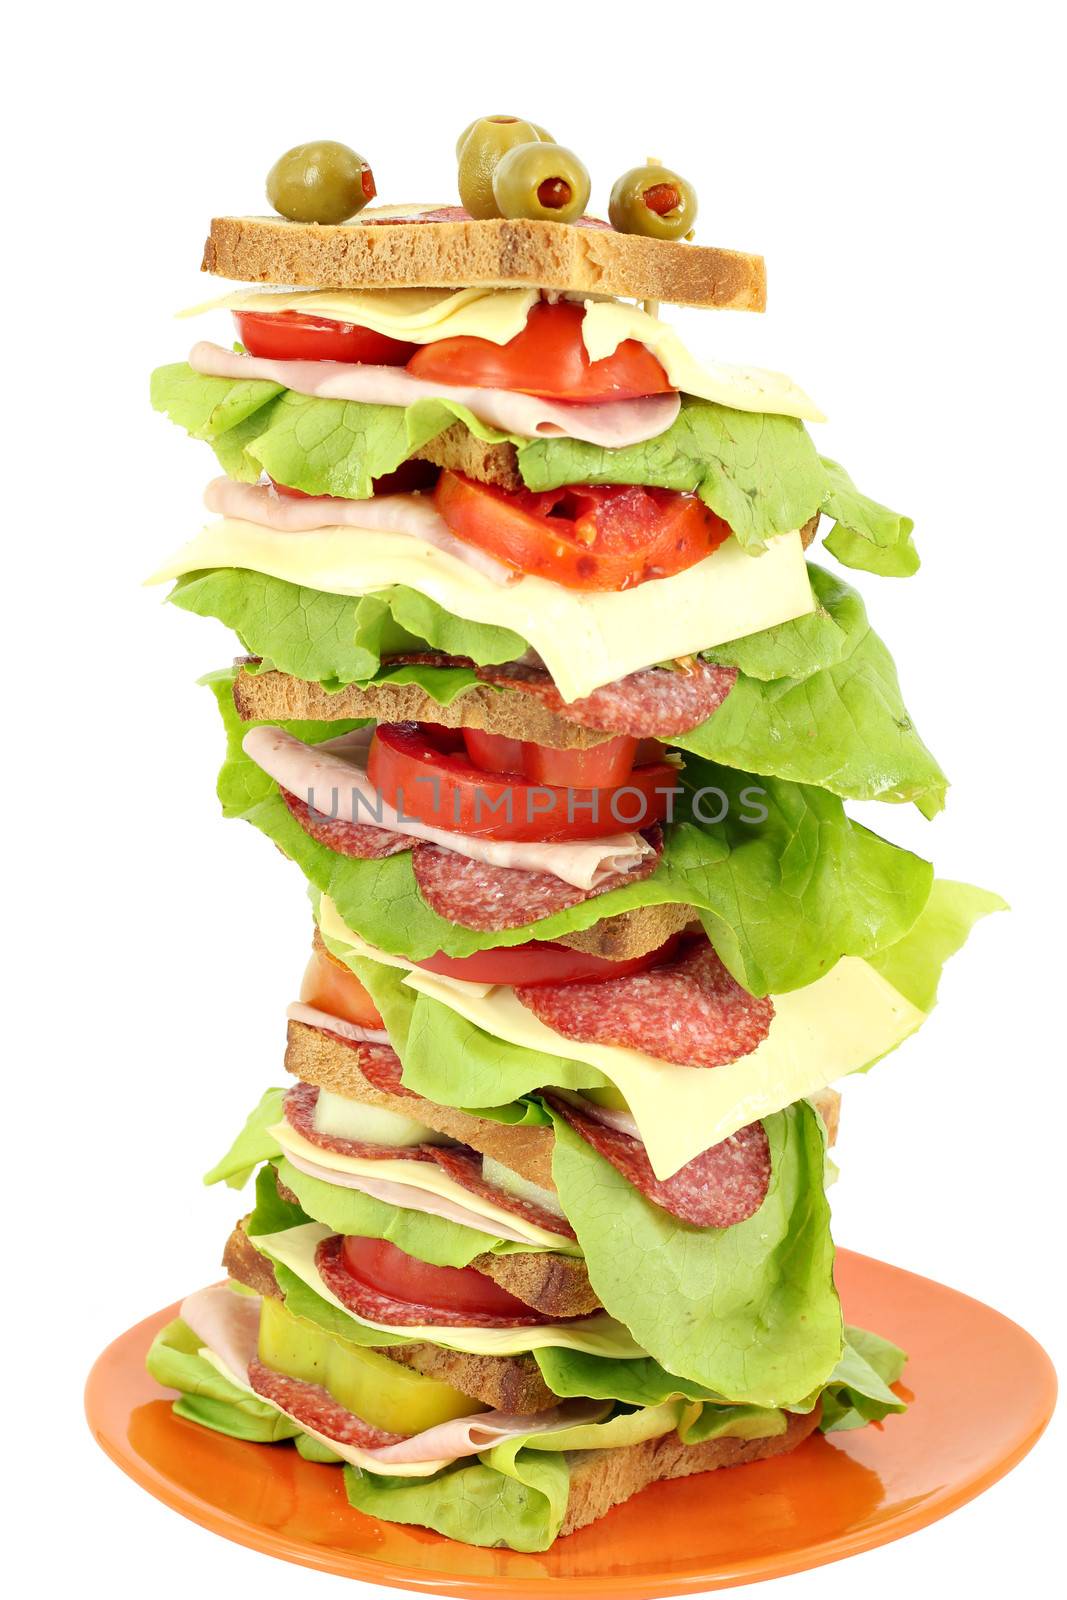 tall sandwich with ham salad and cheese on white background 